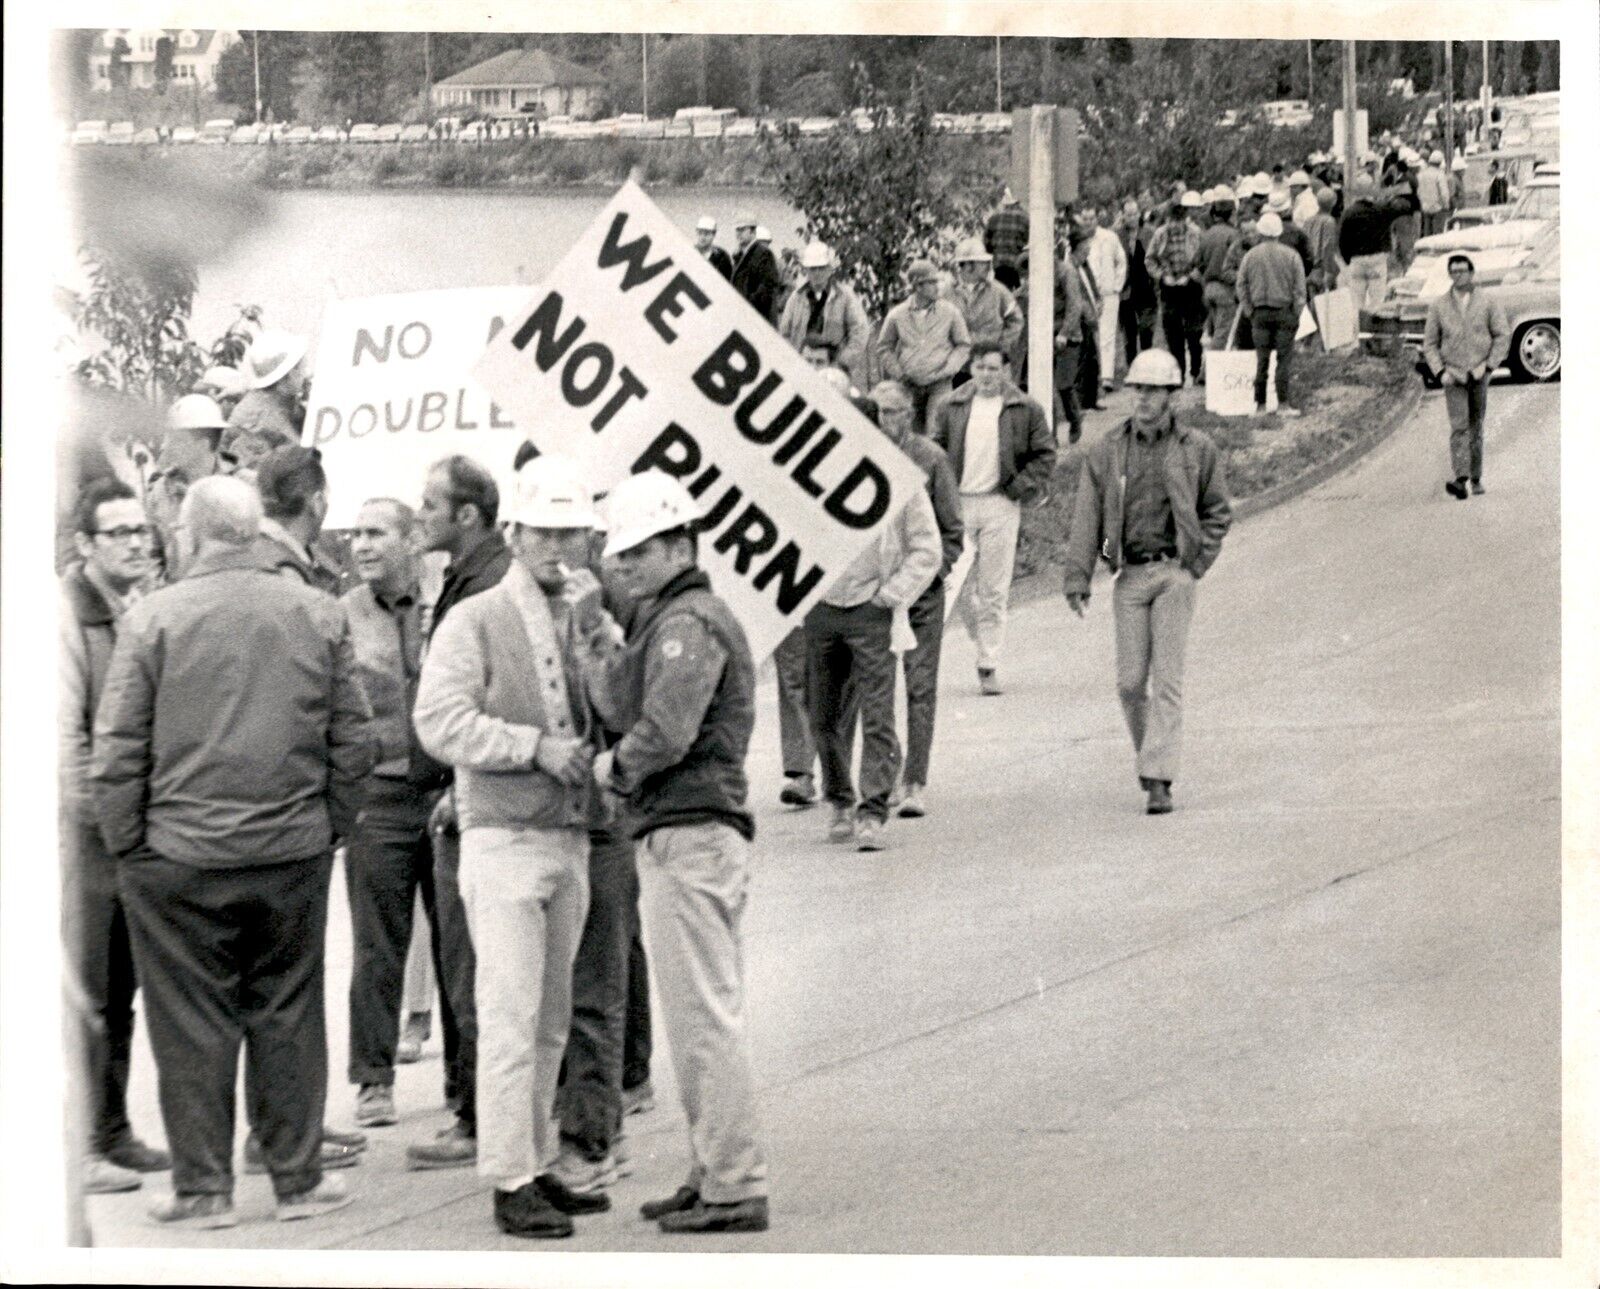 LG986 1969 Orig Photo CONSTRUCTION WORKERS UNION PROTEST Demonstration Pickets